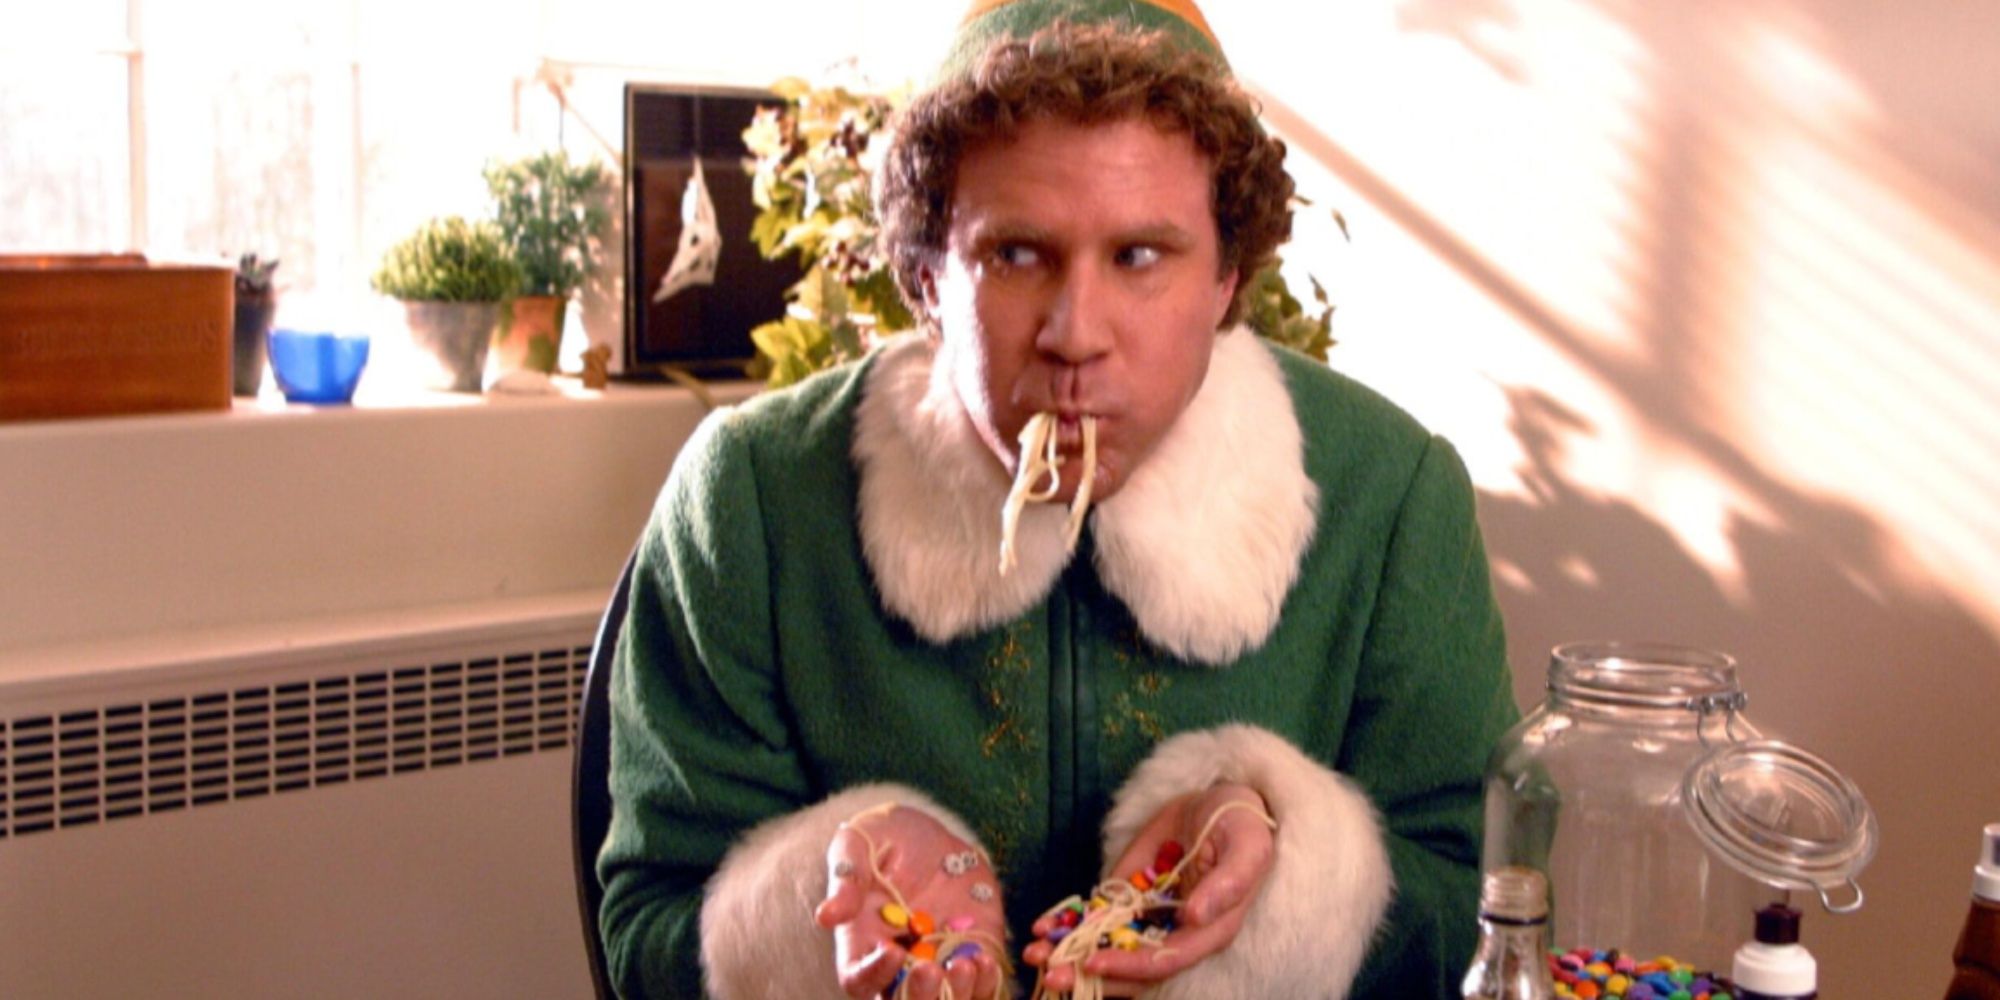 Will Ferrell's Buddy eating spaghetti with pasta and candy, an with noodles in his mouth and an open jar of M&Ms and syrups beside him.